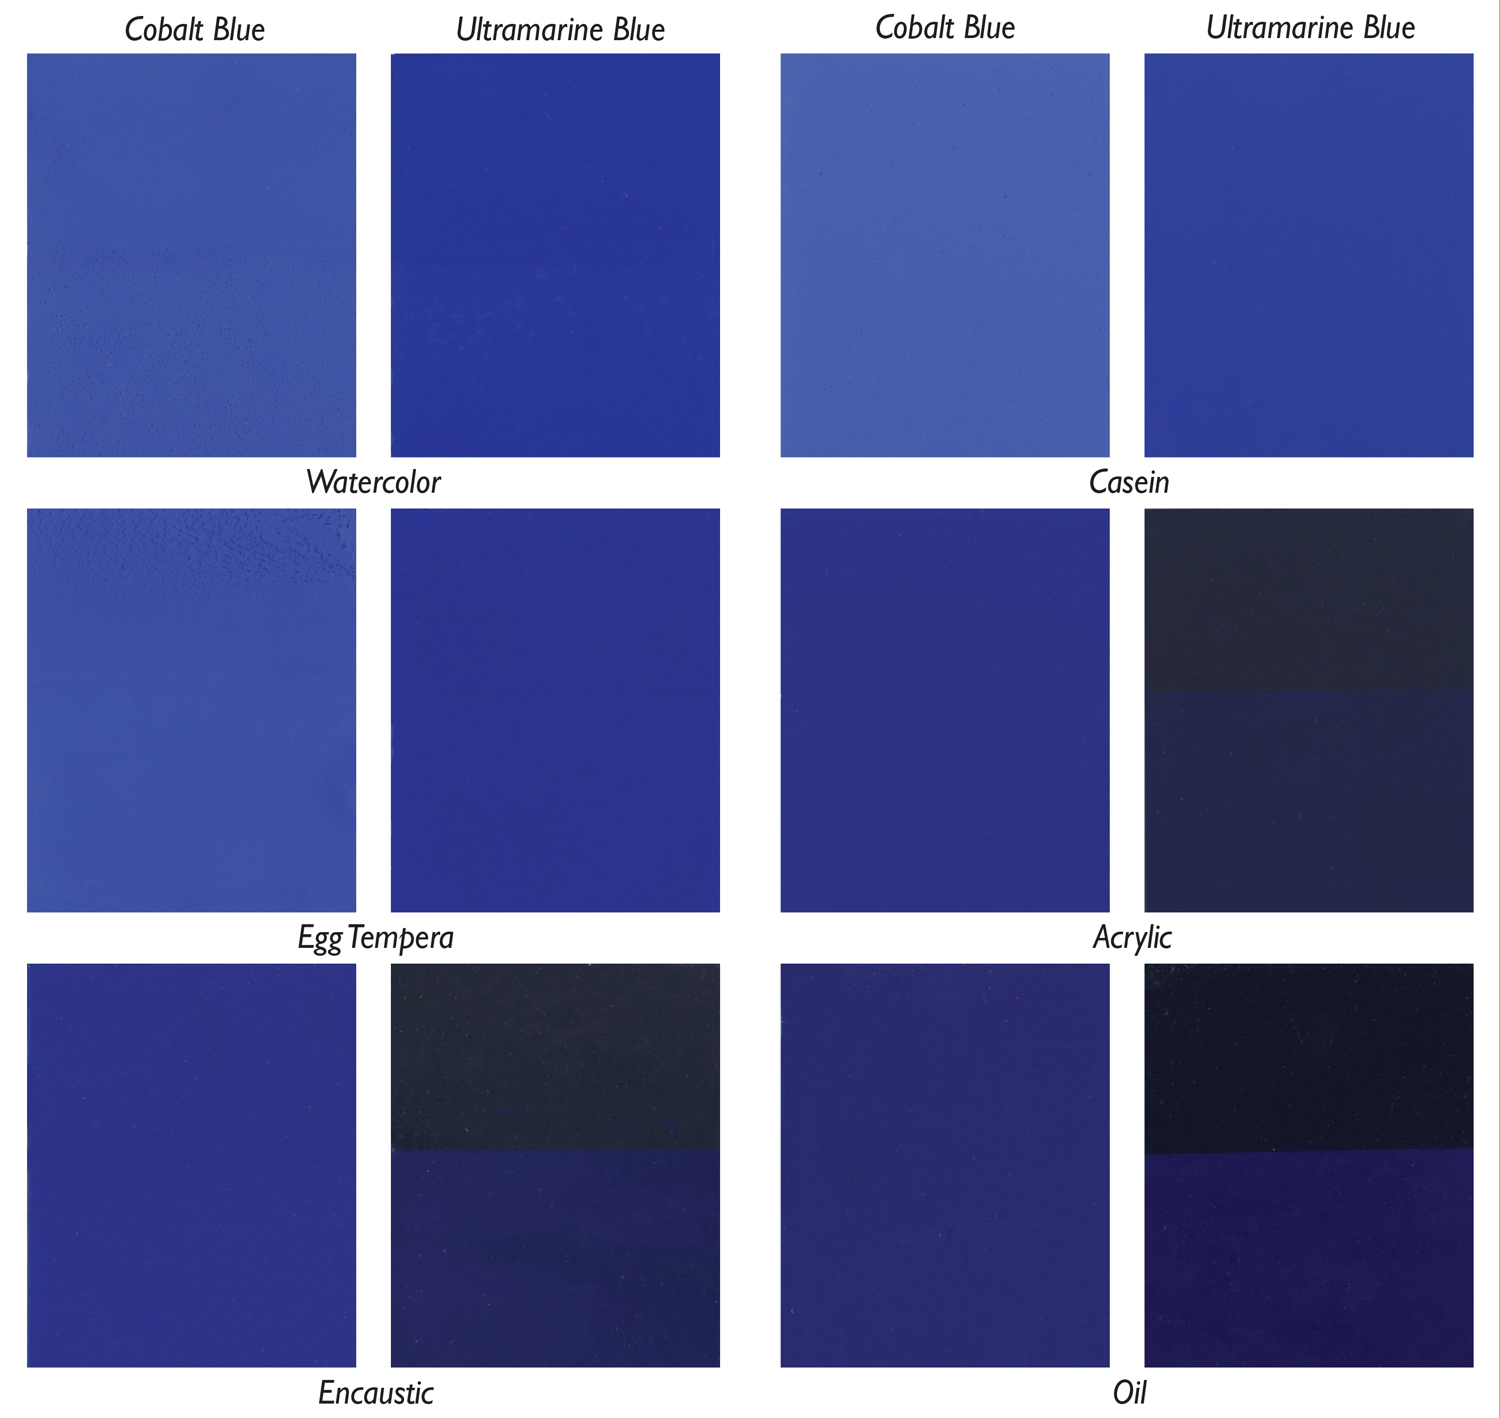 Image 1: CAA Materials Panel Presentation Board showing Cobalt and Ultramarine Blue in watercolor, casein, egg tempera, acrylic, encaustic, and oil.